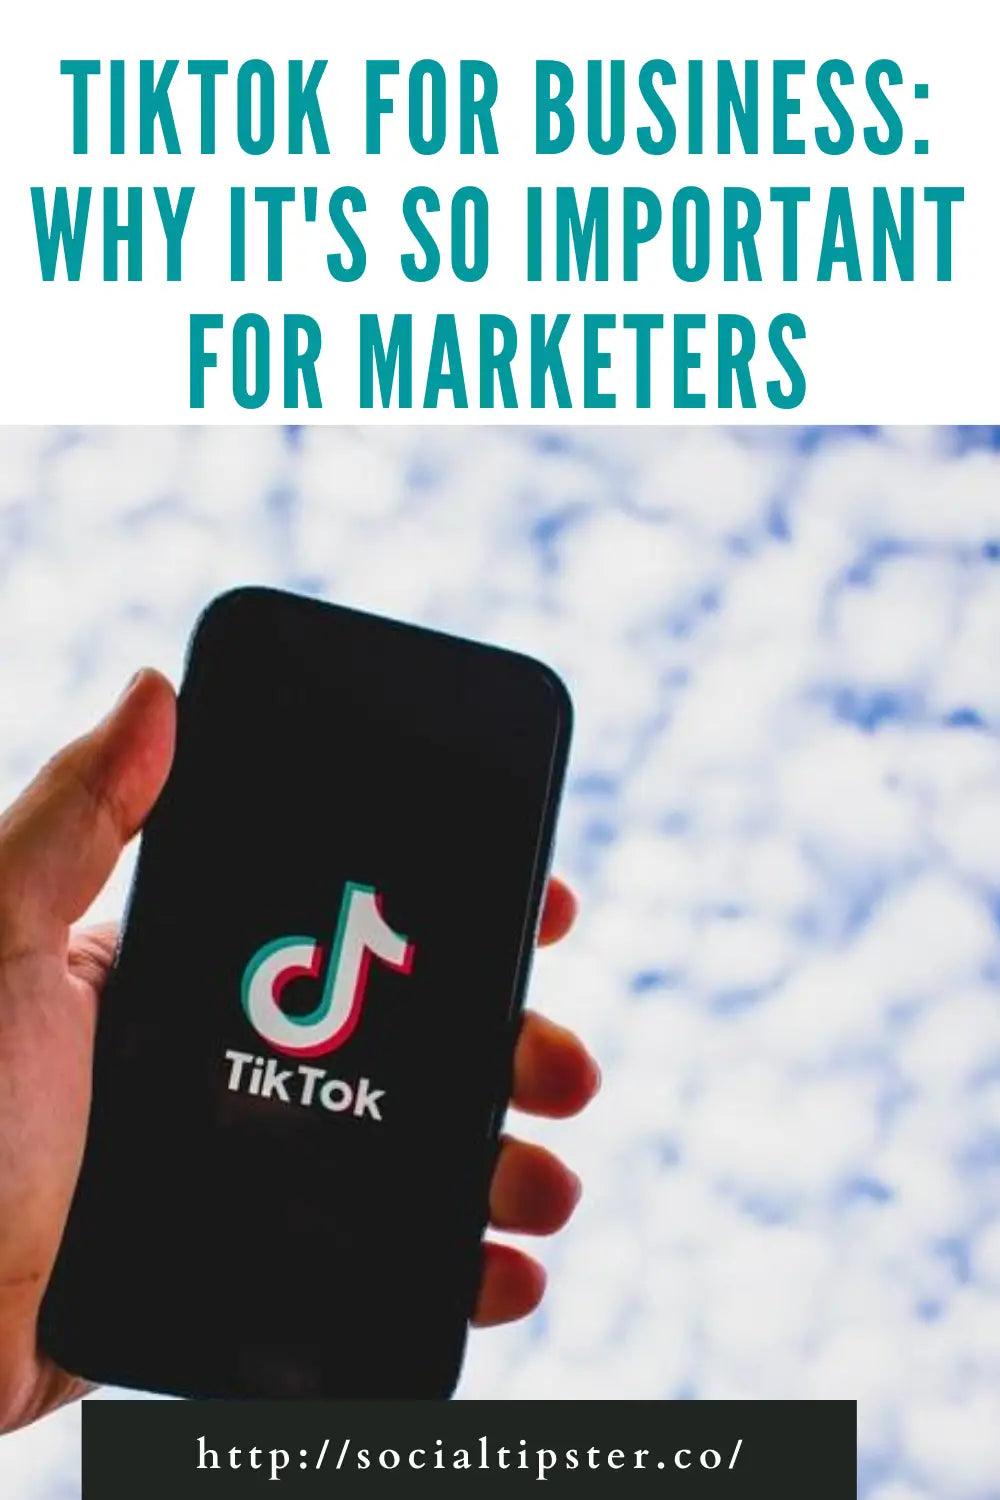 TikTok for Business: Why it's so important for marketers;social tipster;TikTok for Business: Why it's so important for marketers